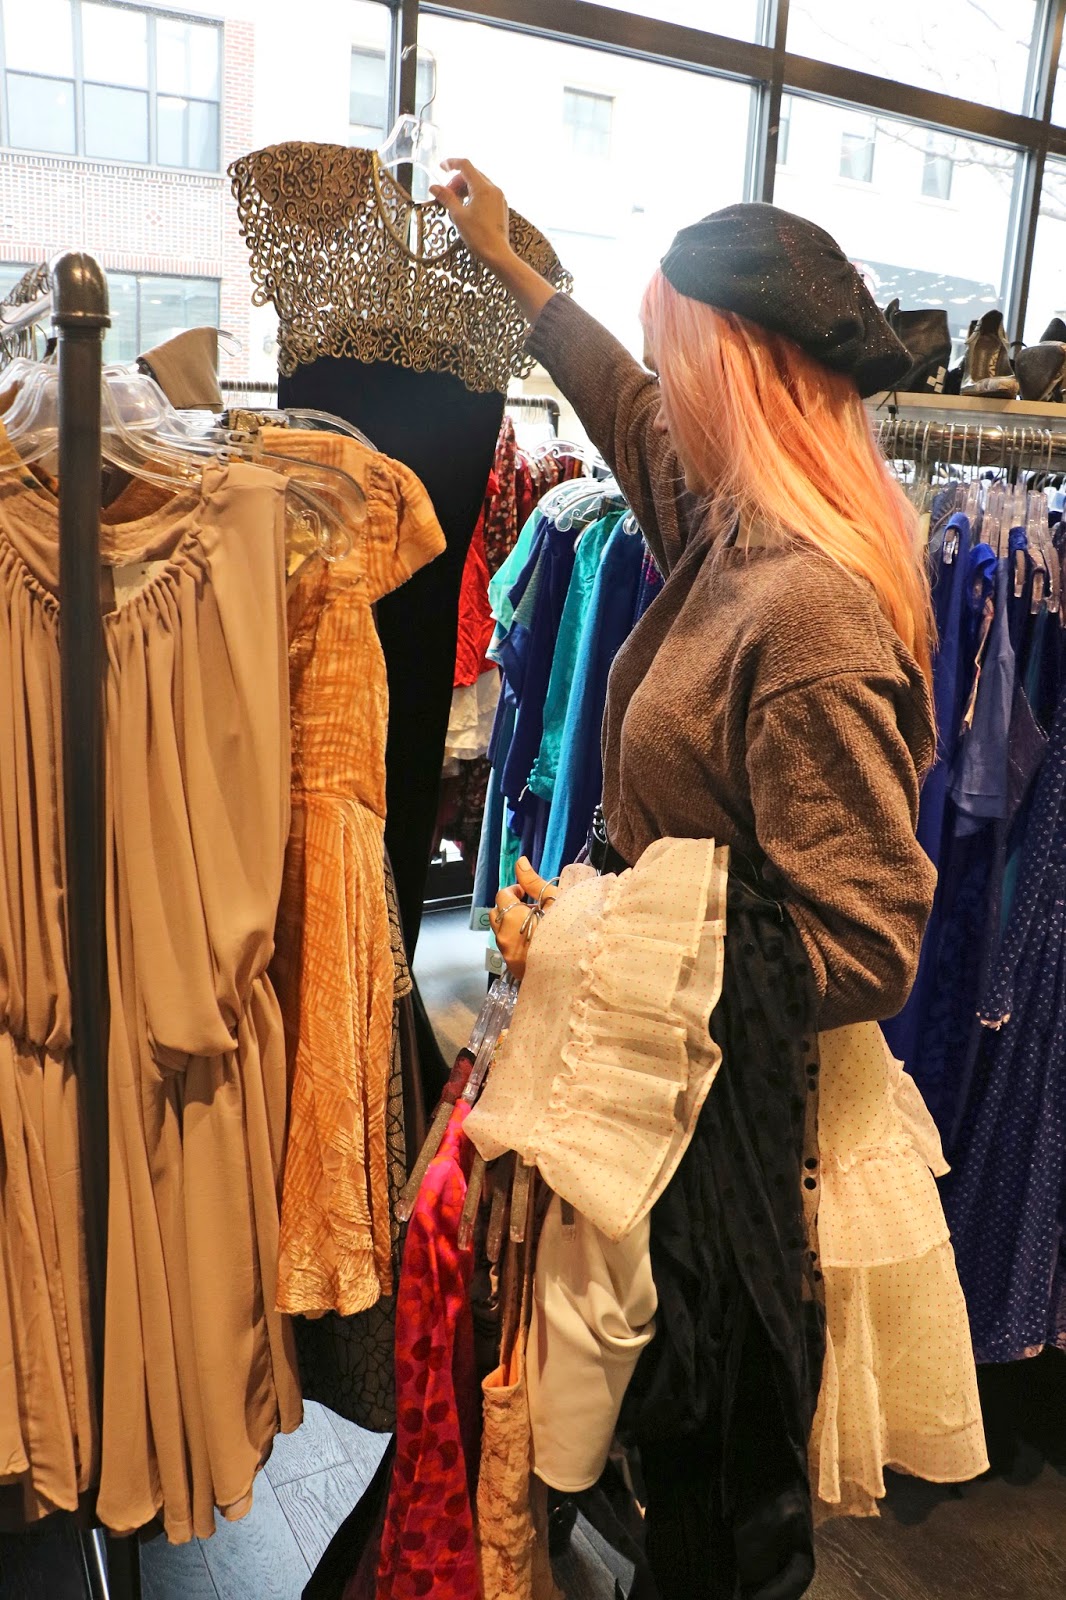 When visiting Brooklyn New York, be sure to check out Beacon's Closet for some amazing Vintage and second-hand clothing!